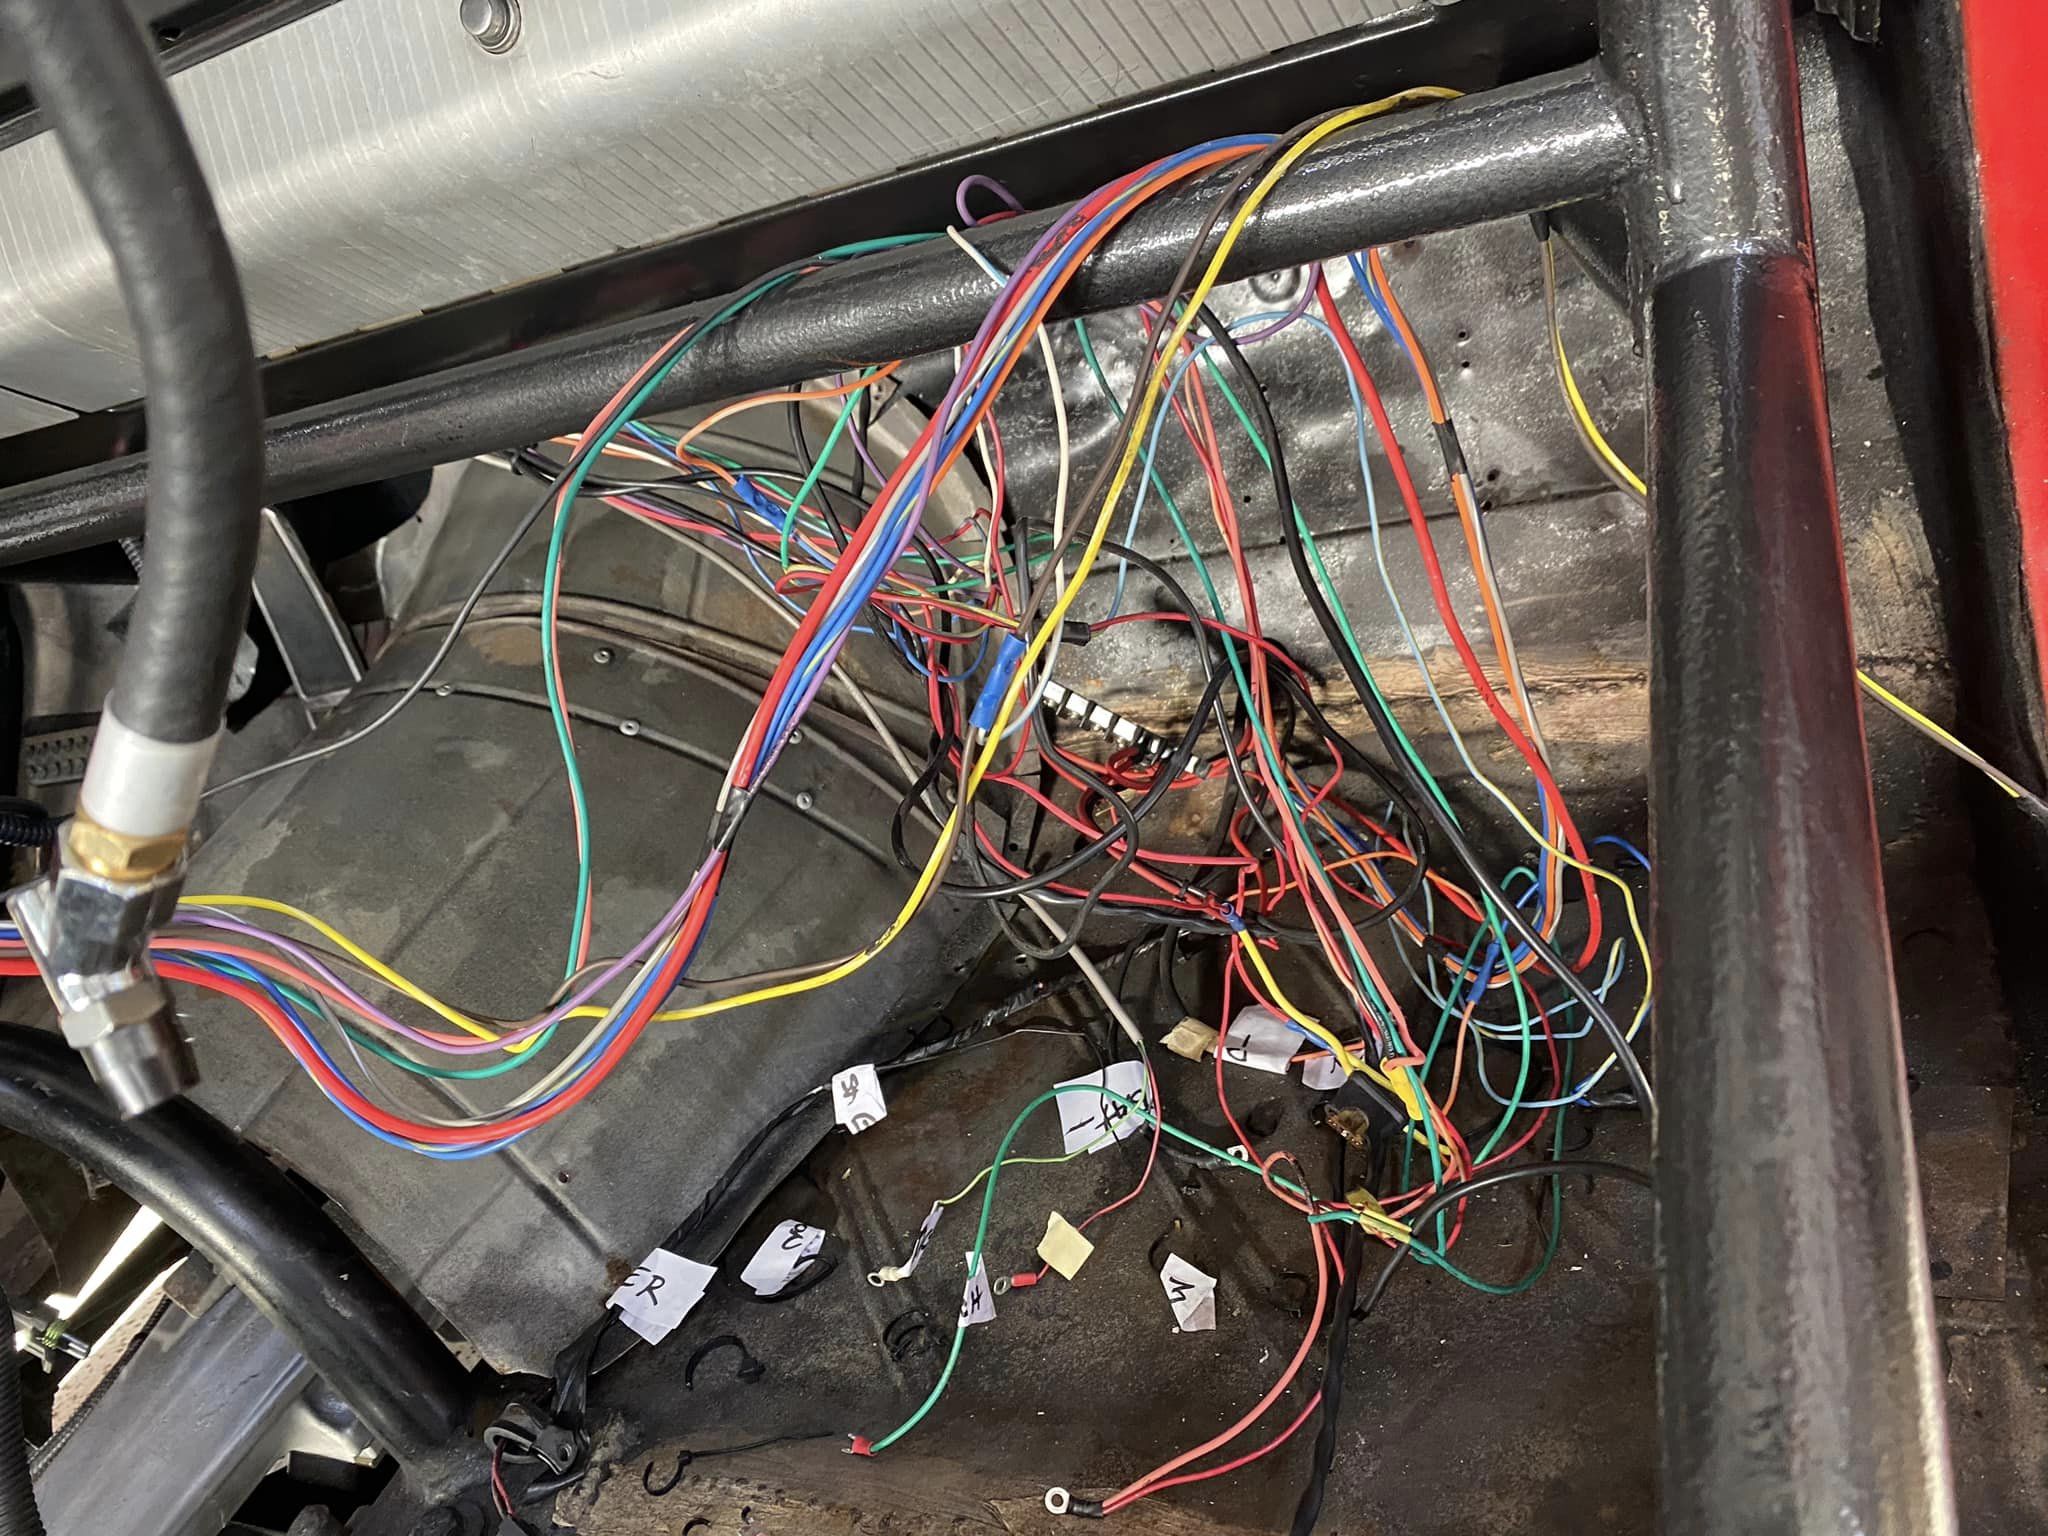 Gutted the Wiring Out of My Wagon